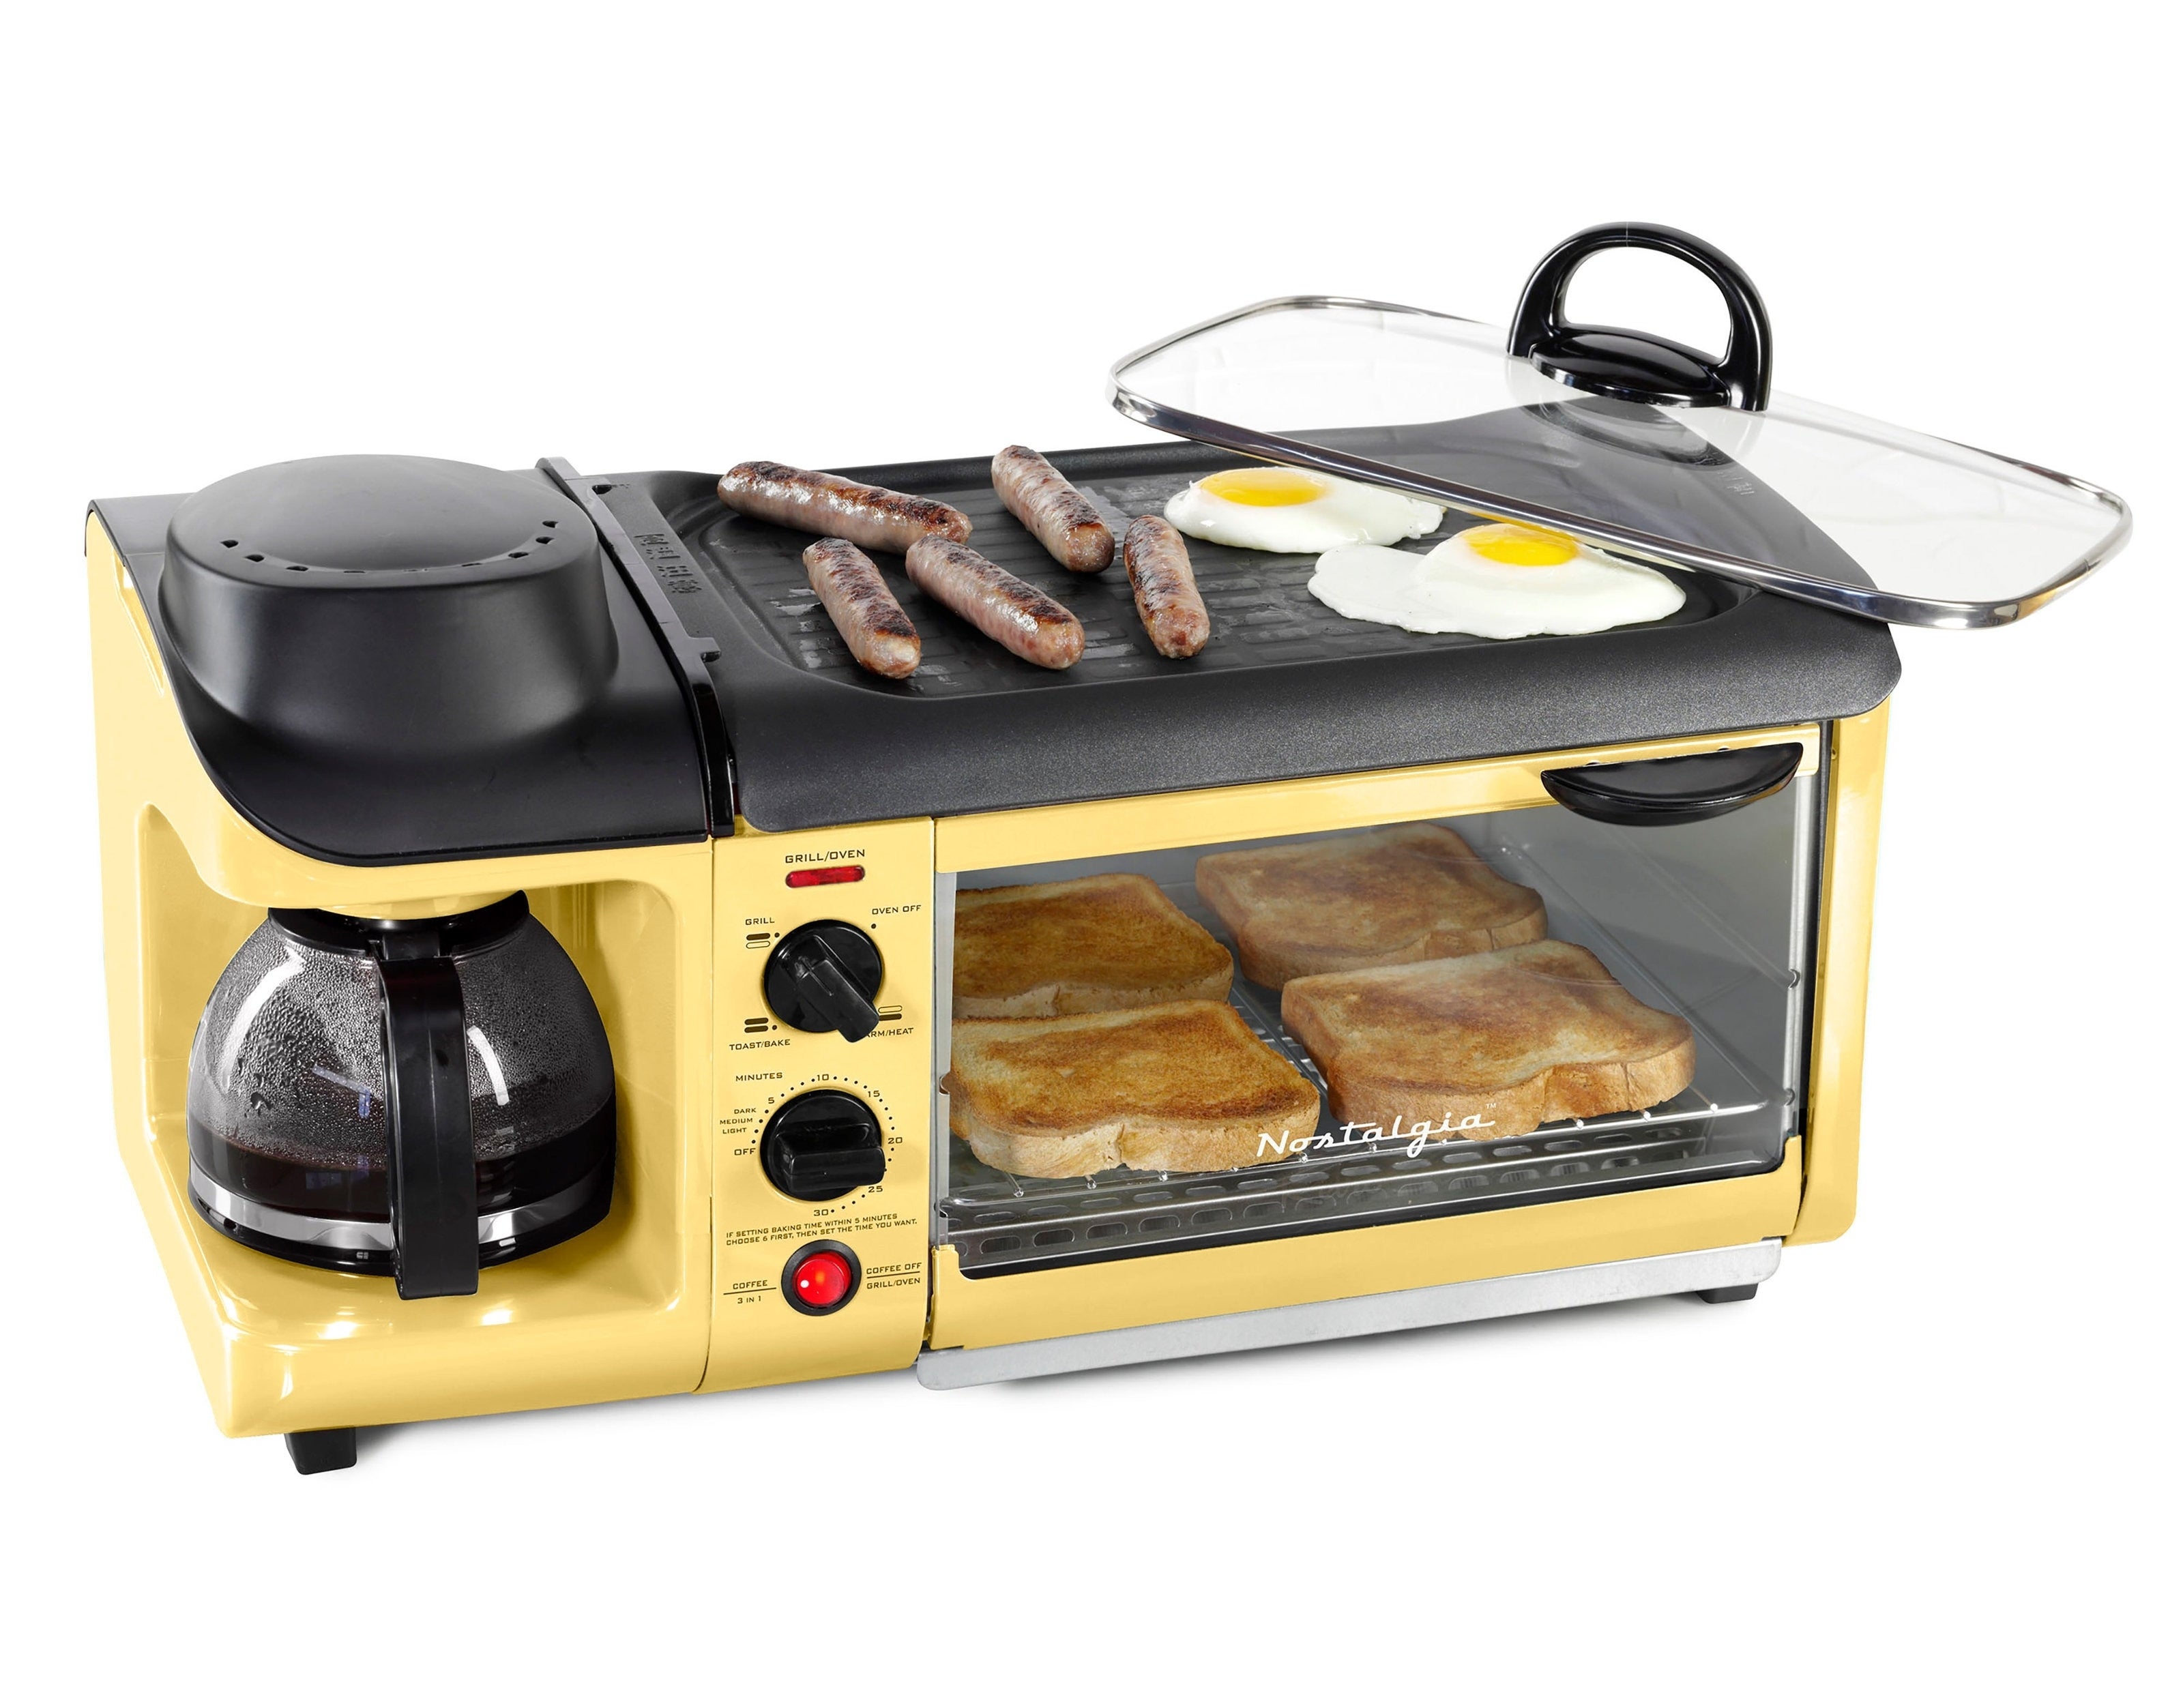 Compact breakfast station with coffee pot, griddle, and oven, with food cooking